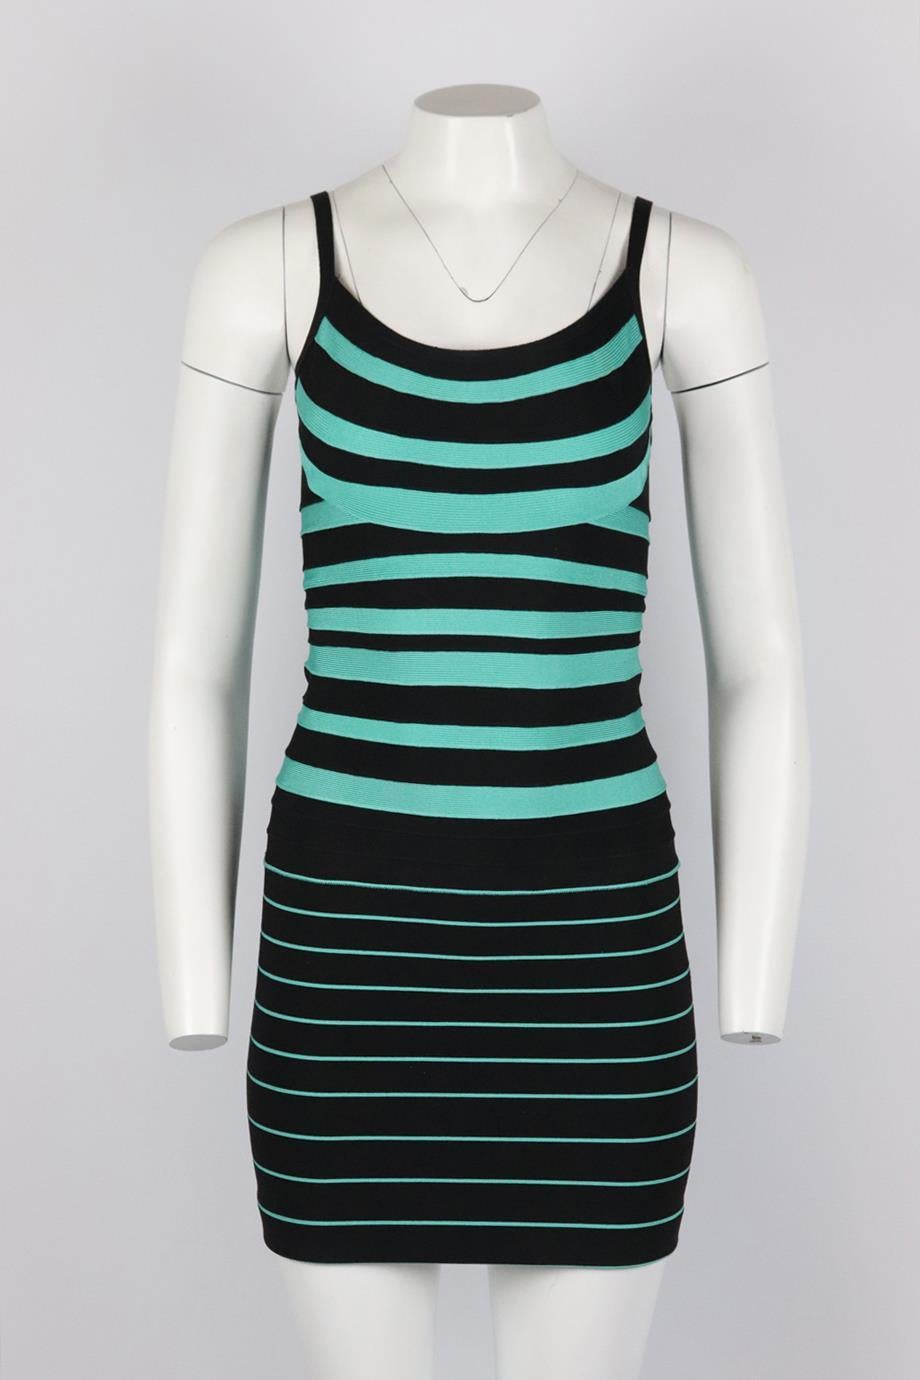 Herve Leger two tone bandage mini dress. Green and black. Sleeveless, scoop neck. Zip fastening at back. 90% Rayon, 9% nylon, 1% elastane. Size: Small (UK 8, US 4, FR 36, IT 40). Bust: 29 in. Waist: 23 in. Hips: 30 in. Length: 31 in. Very good